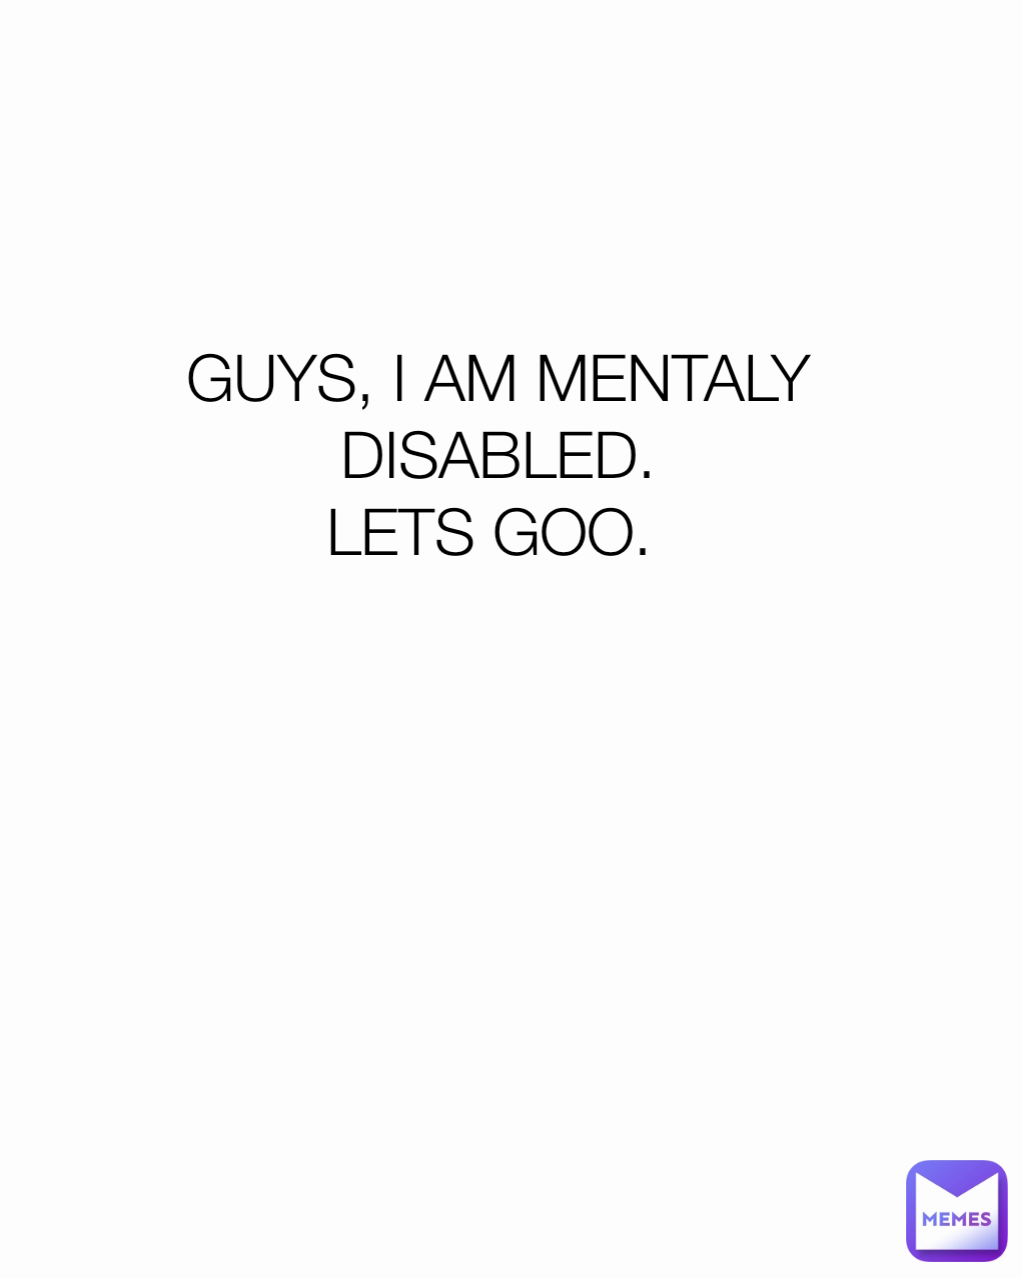 GUYS, I AM MENTALY DISABLED.
LETS GOO. 